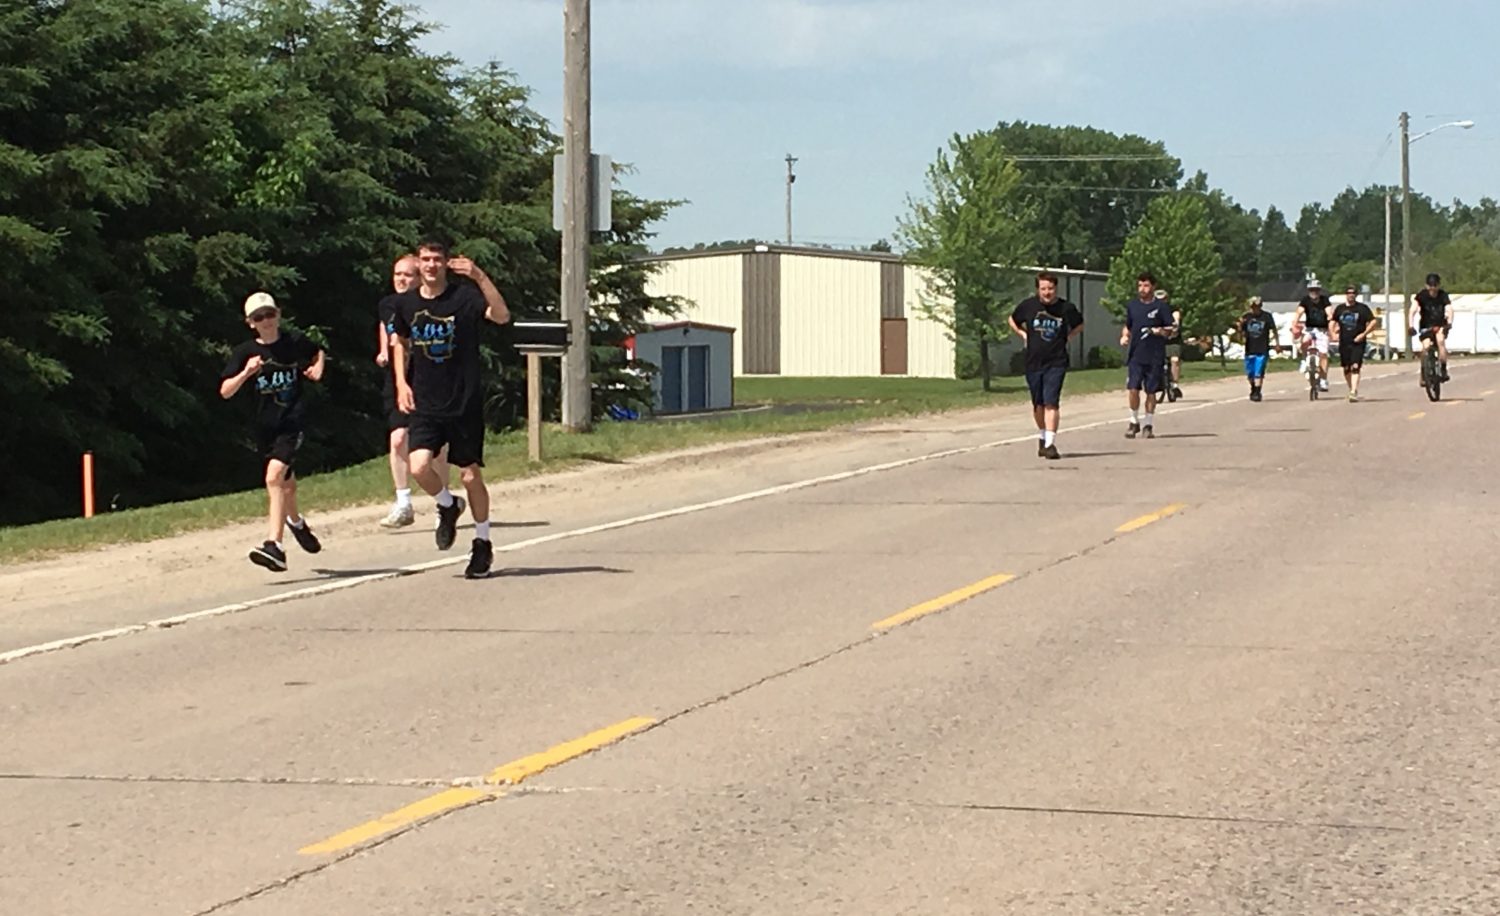 Members of the Marshfield Police Department and Special Olympics athletes participate in the Region 2 leg of the Special Olympics Summer Games Torch Run on June 8.